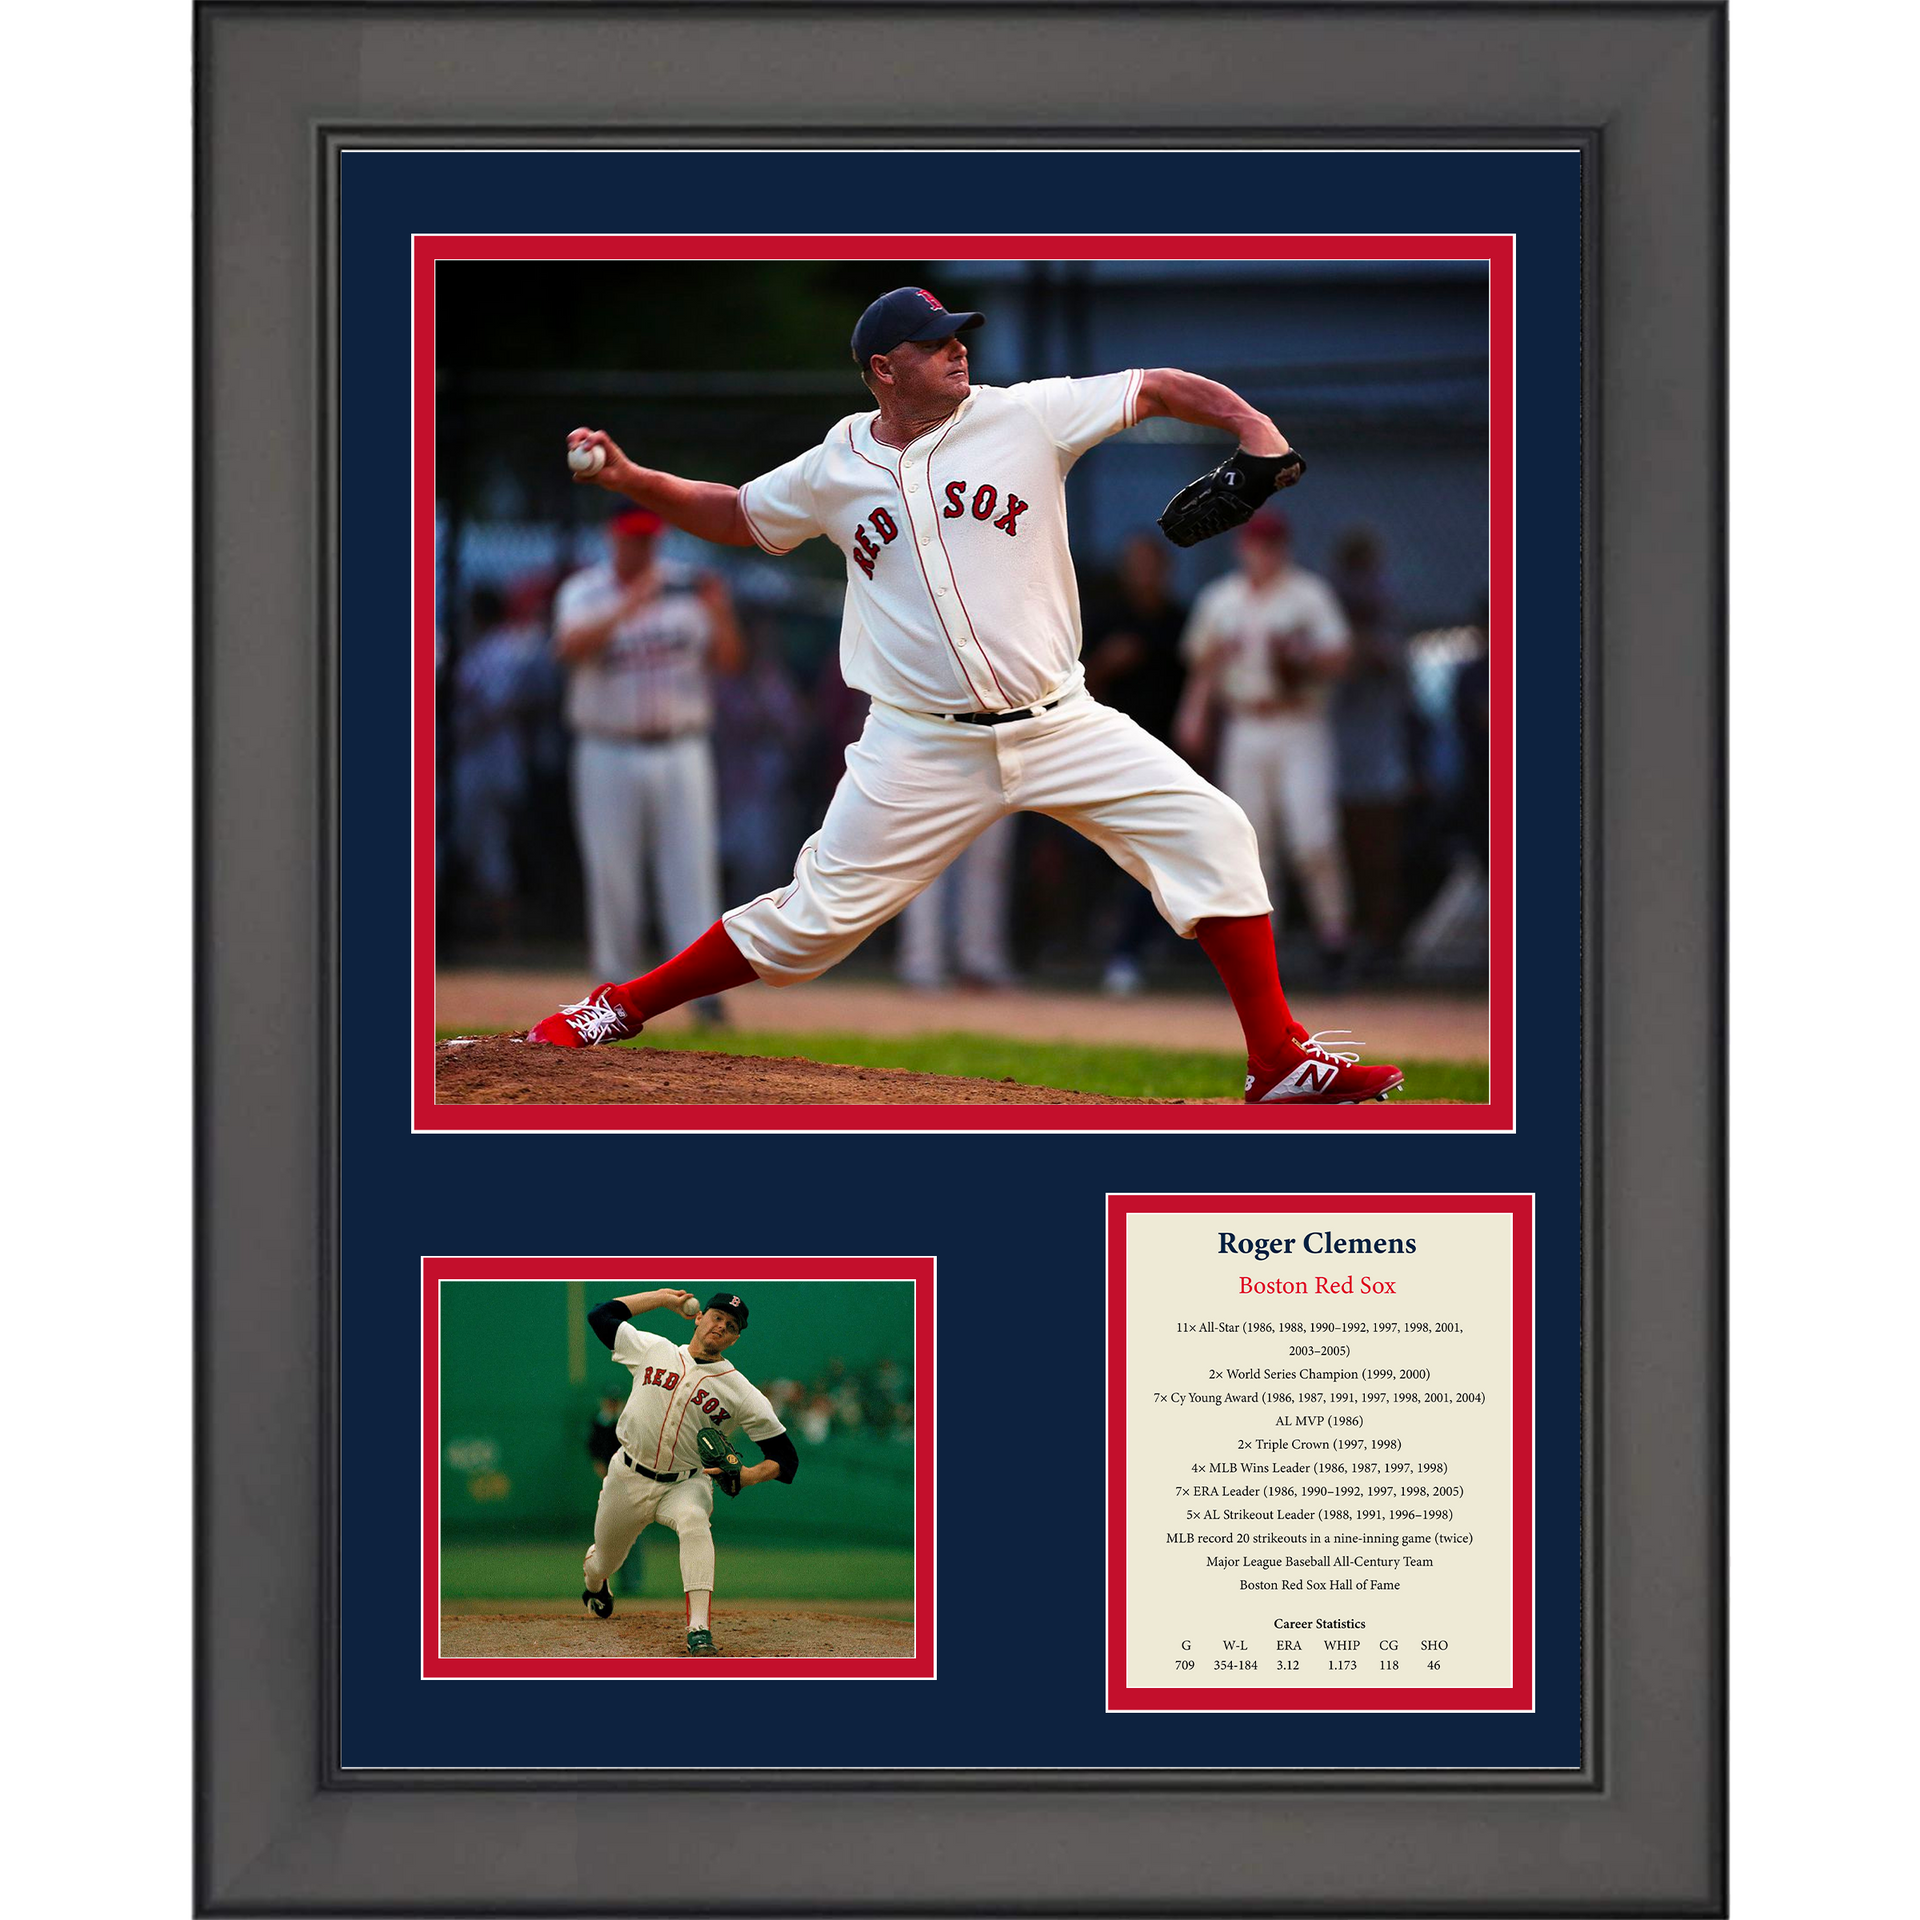 Framed Roger Clemens Boston Red Sox Hall of Fame 12x15 Baseball Photo  Collage - Hall of Fame Sports Memorabilia